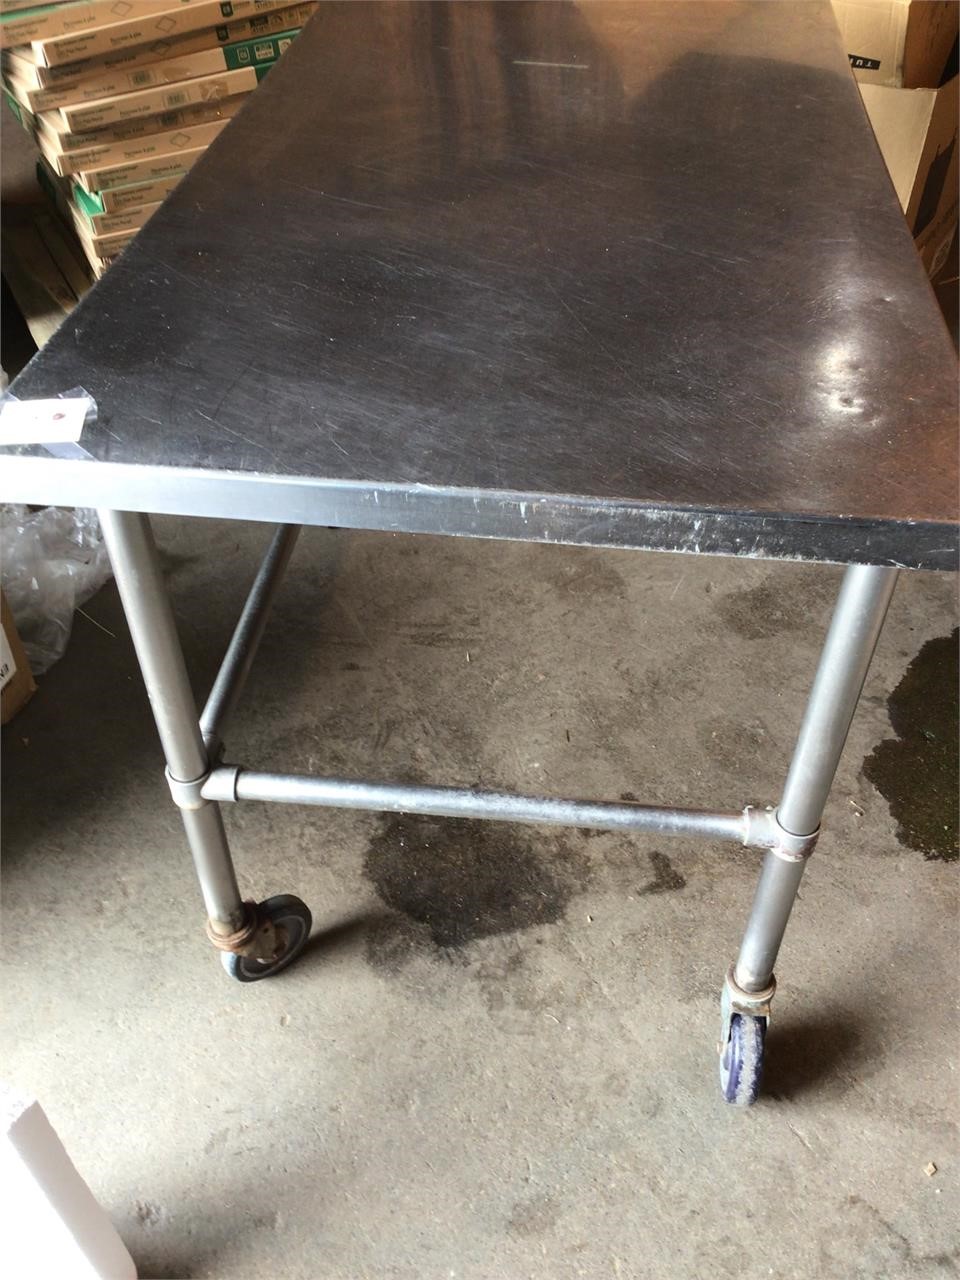 Stainless steel table no lower shelf